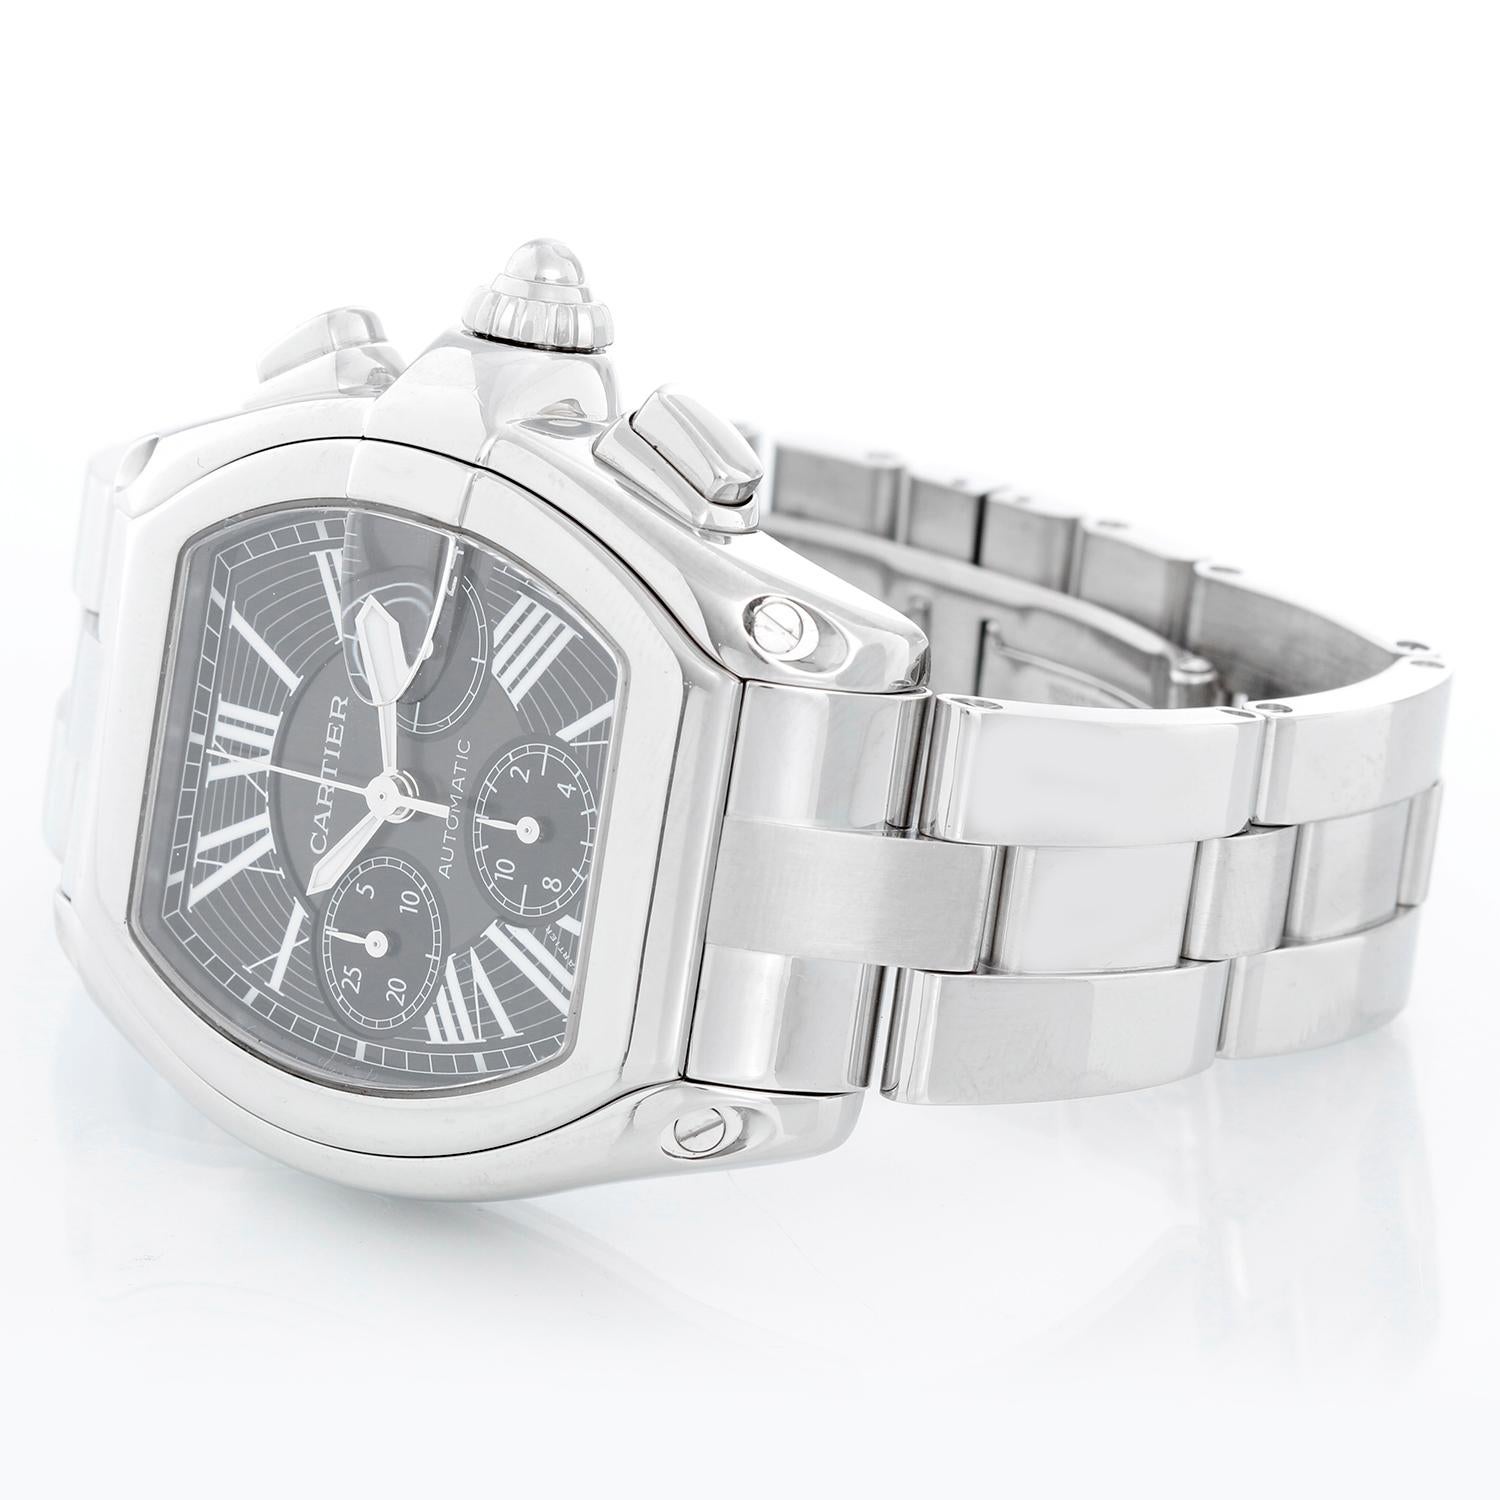 Cartier Roadster Chronograph Stainless Steel Men's Watch W62020X6 2618 - Automatic winding chronograph with date. Stainless steel case (43mm x 48mm). Black dial with white Roman numerals; date at 3 o'clock. Stainless steel Cartier bracelet with